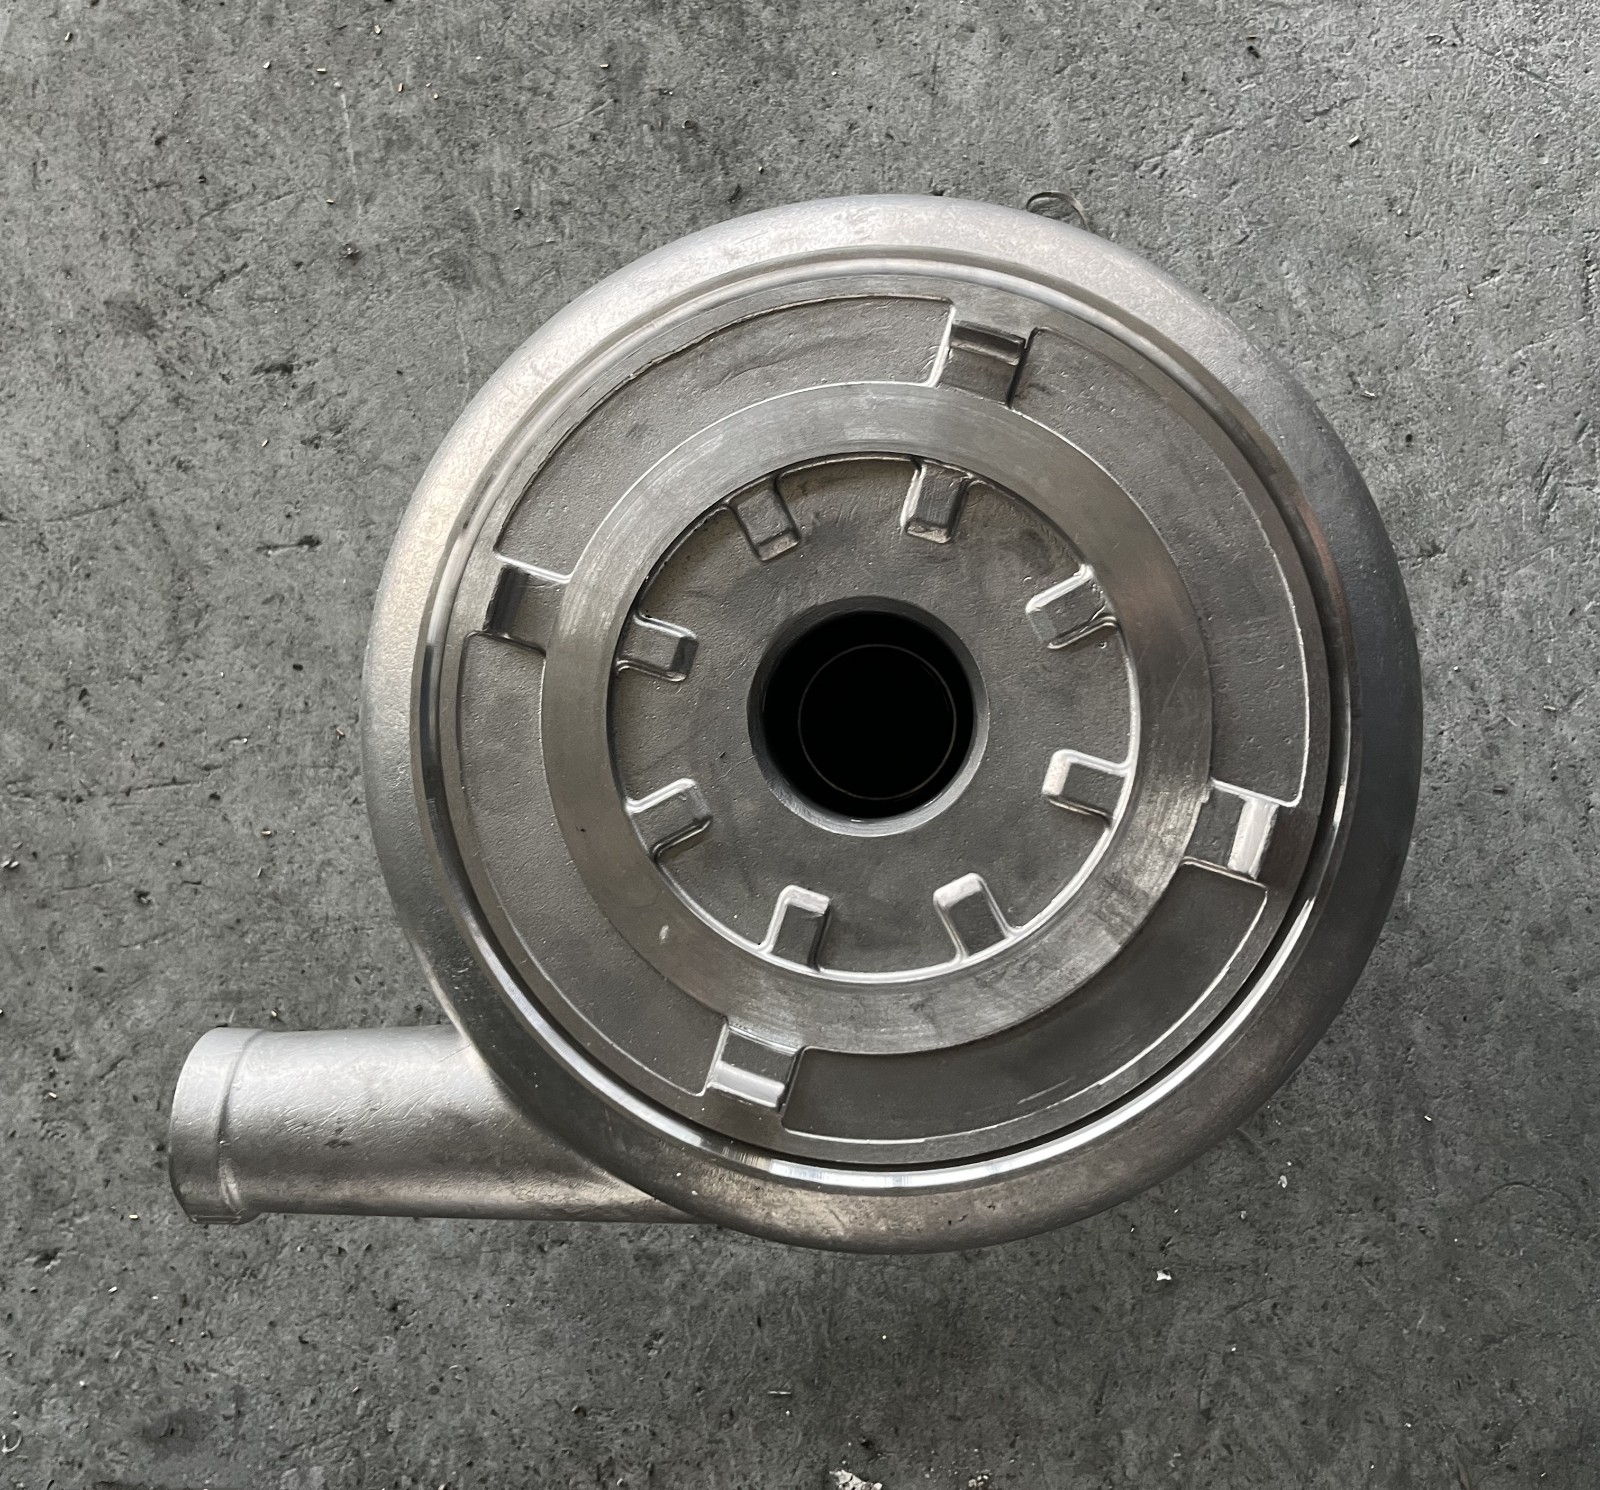 Two-phase steel pump parts